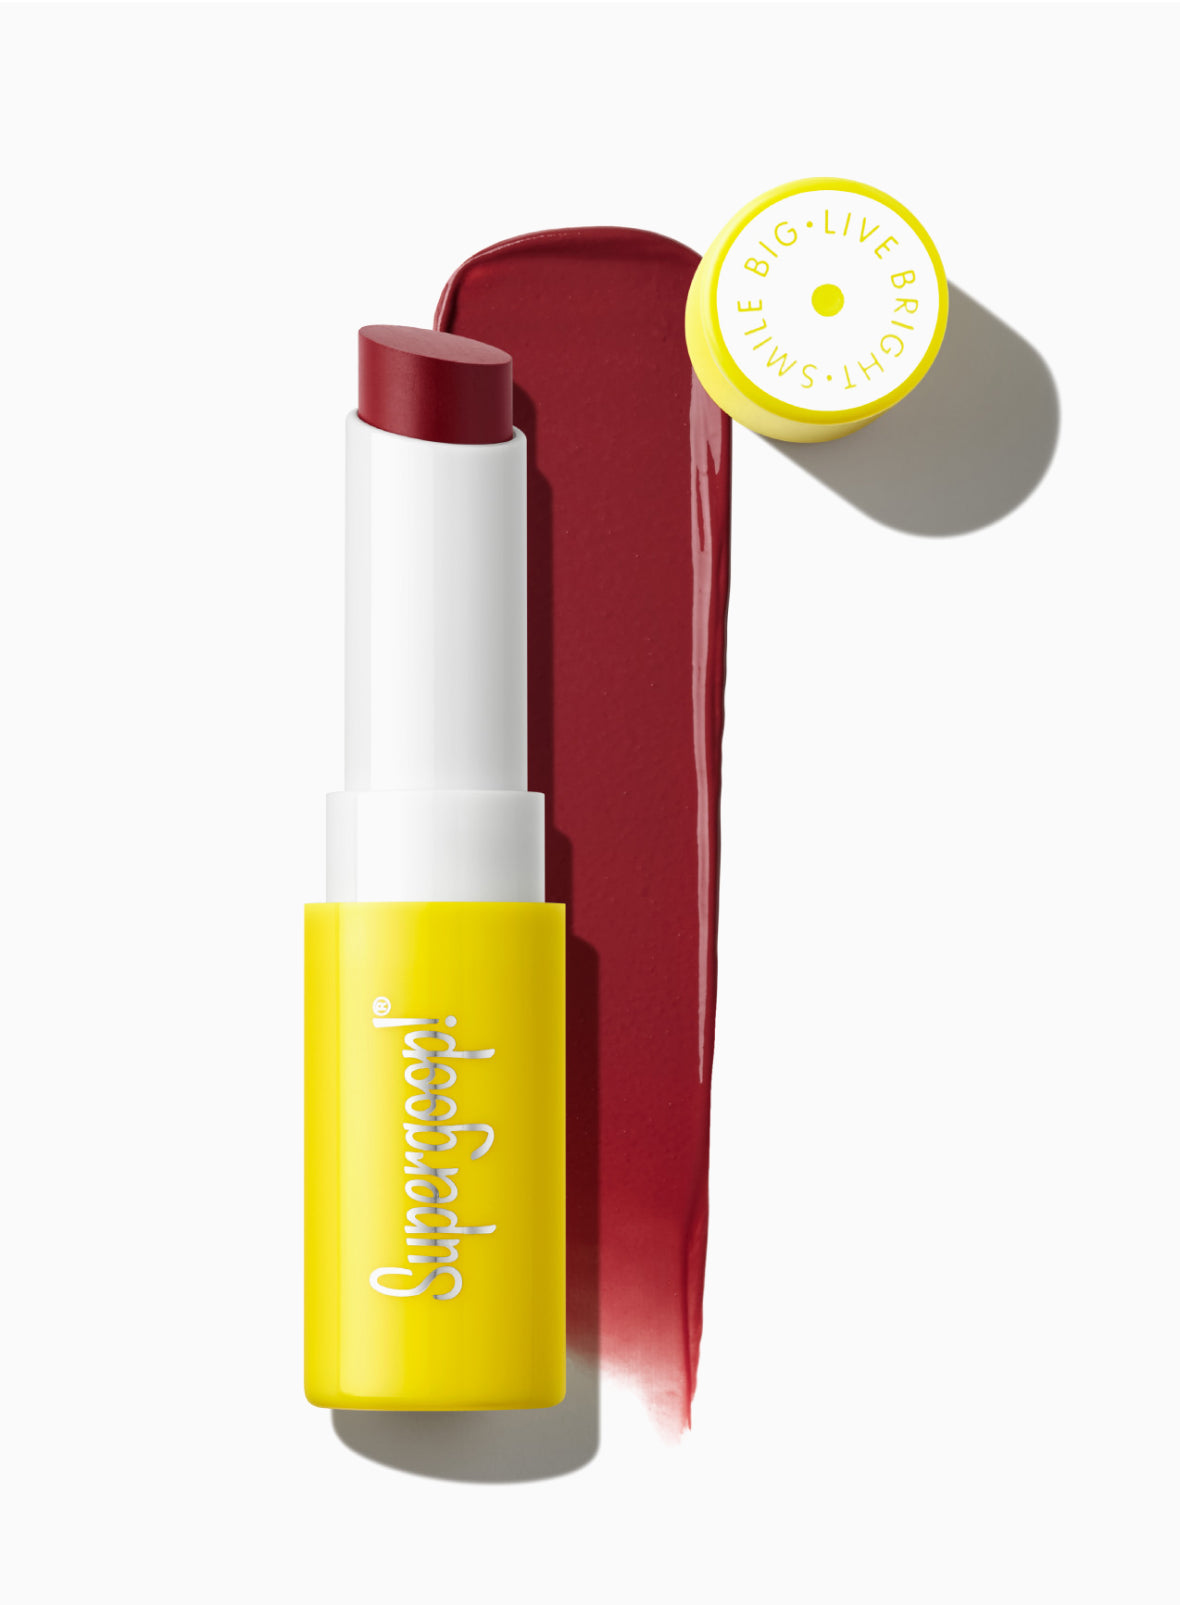 Lipshade 100% Mineral Lip Color SPF 30 Sunscreen Love You More | Supergoop!